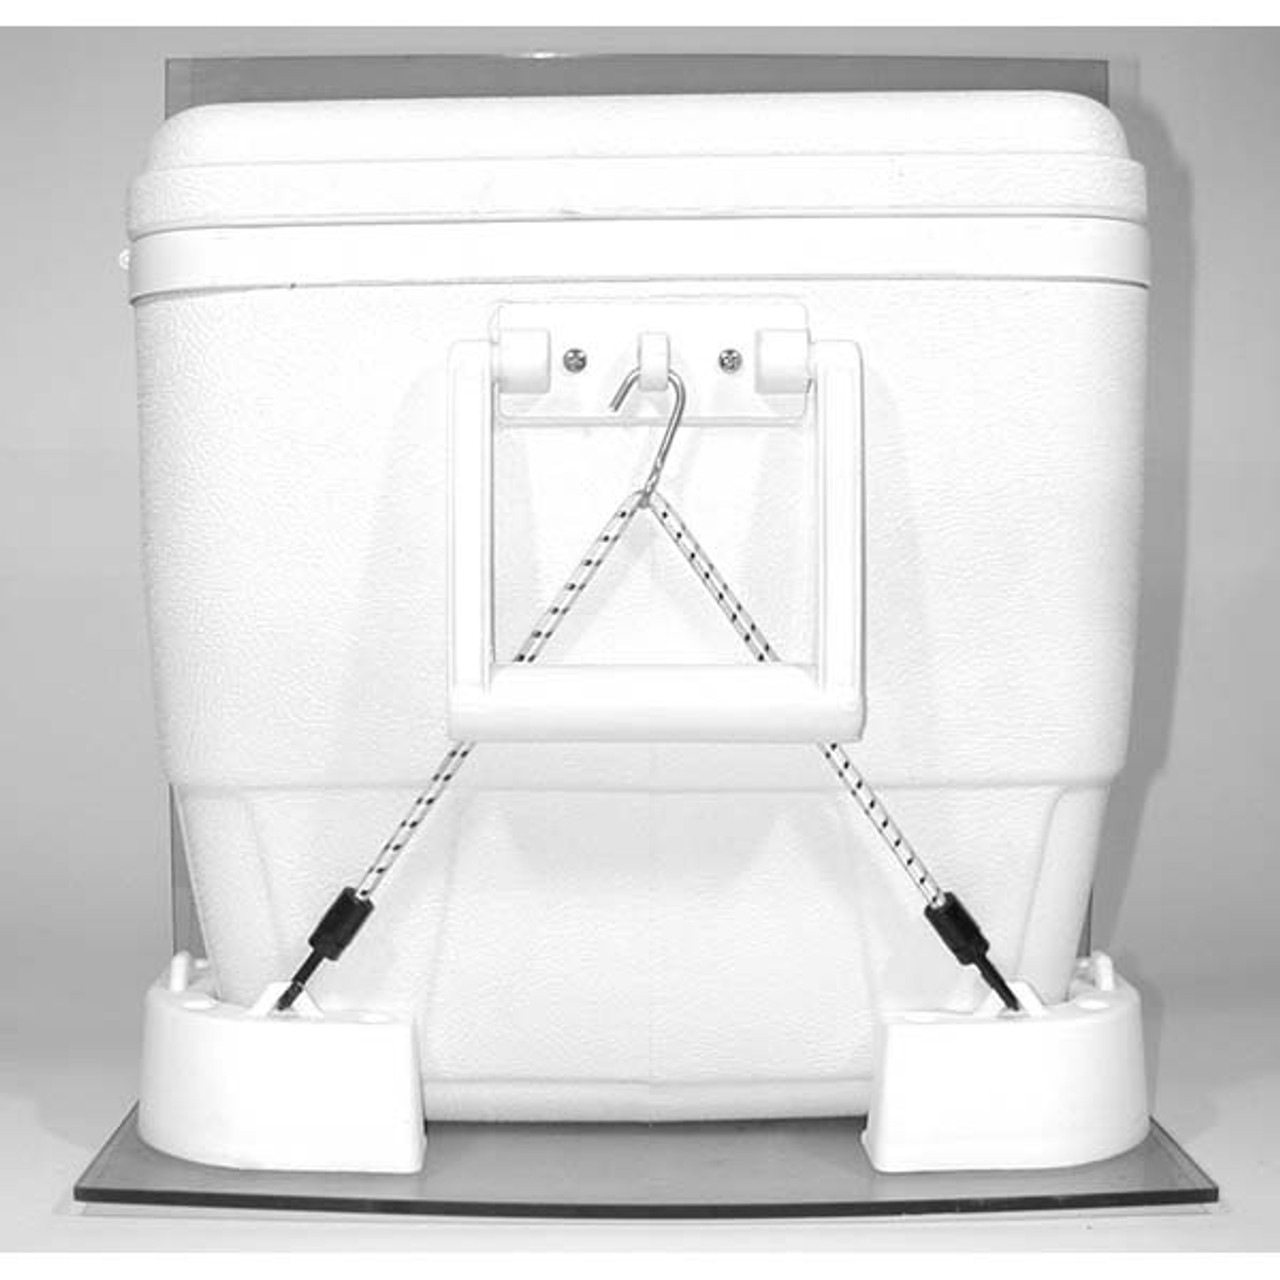 Cooler Cargo Mounting kit (White or Black) - 1st-Relief